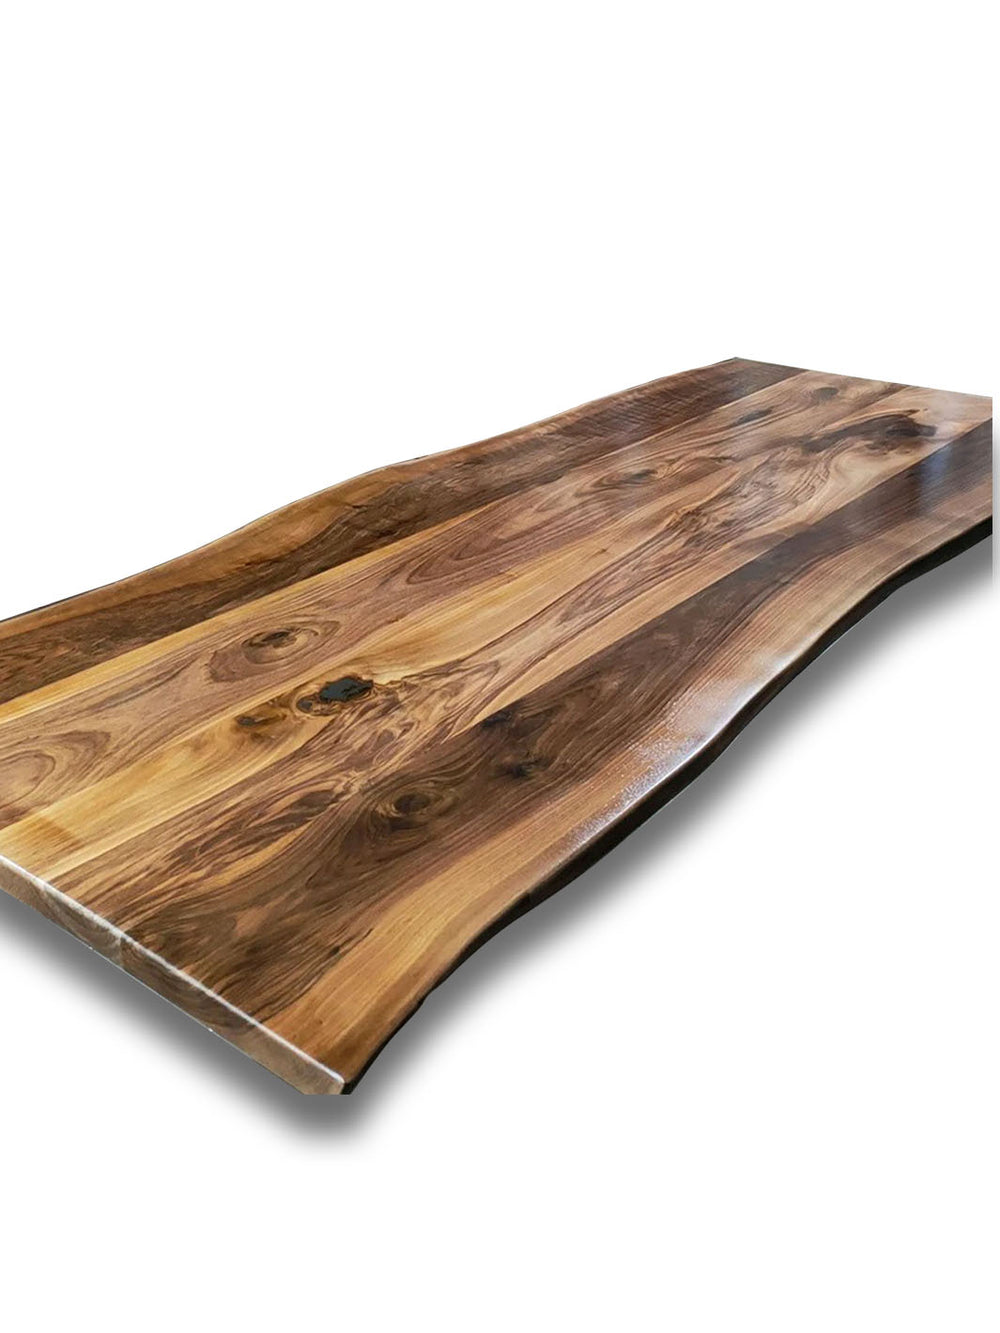 Handcrafted Custom Solid Live Edge Walnut Dining Table Harden tables HWC-0885-1